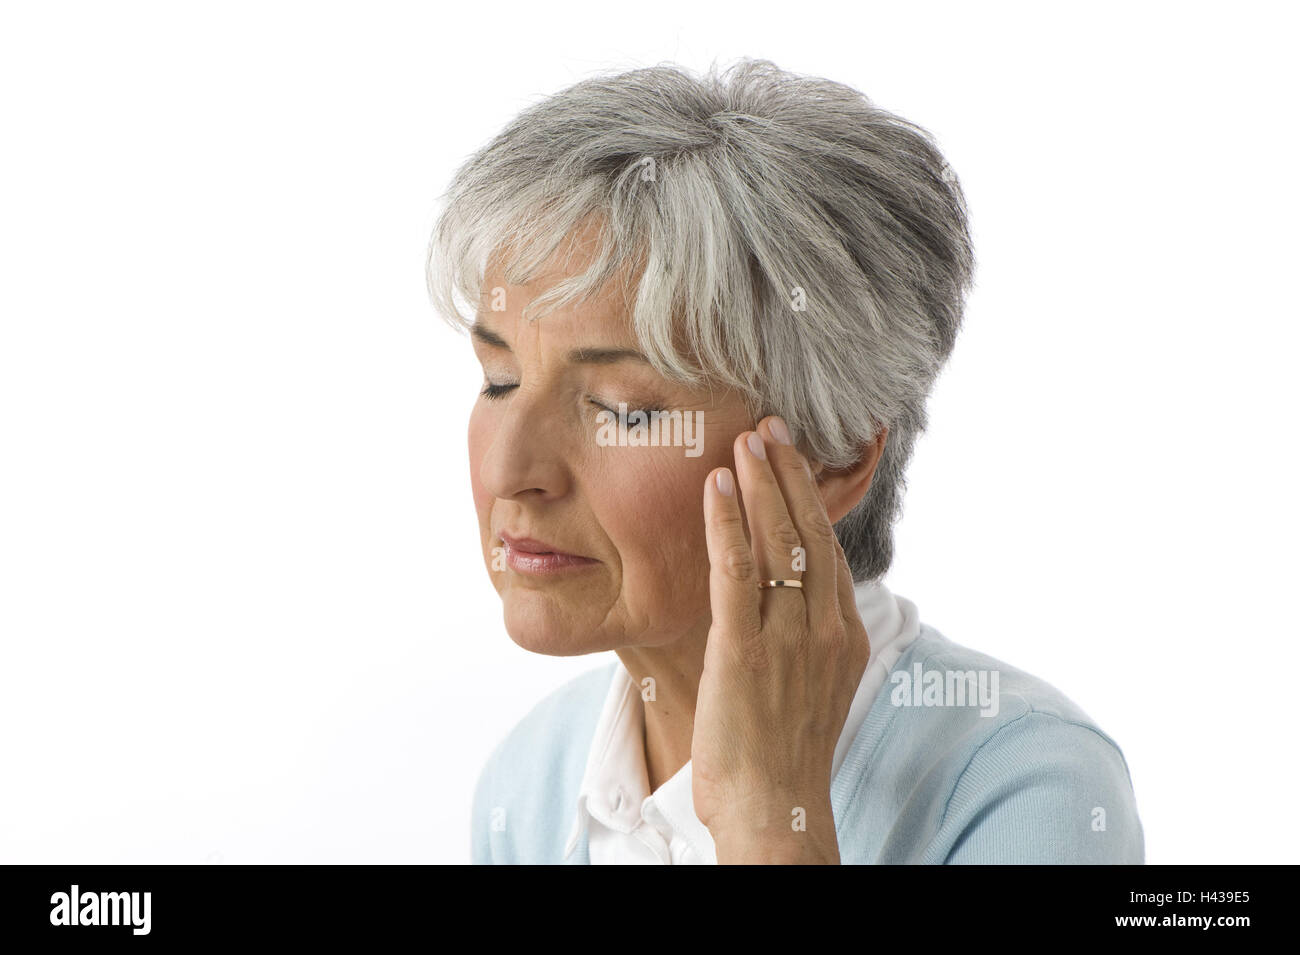 Senior, gesture, cephalalgias, portrait, person, senior citizens, woman, lifestyle, cultivated, attractively, Best-Age, grey-haired, studio, inside, cut out, pains, migraine, reworks, think, consider, worries, of a headache, Stock Photo